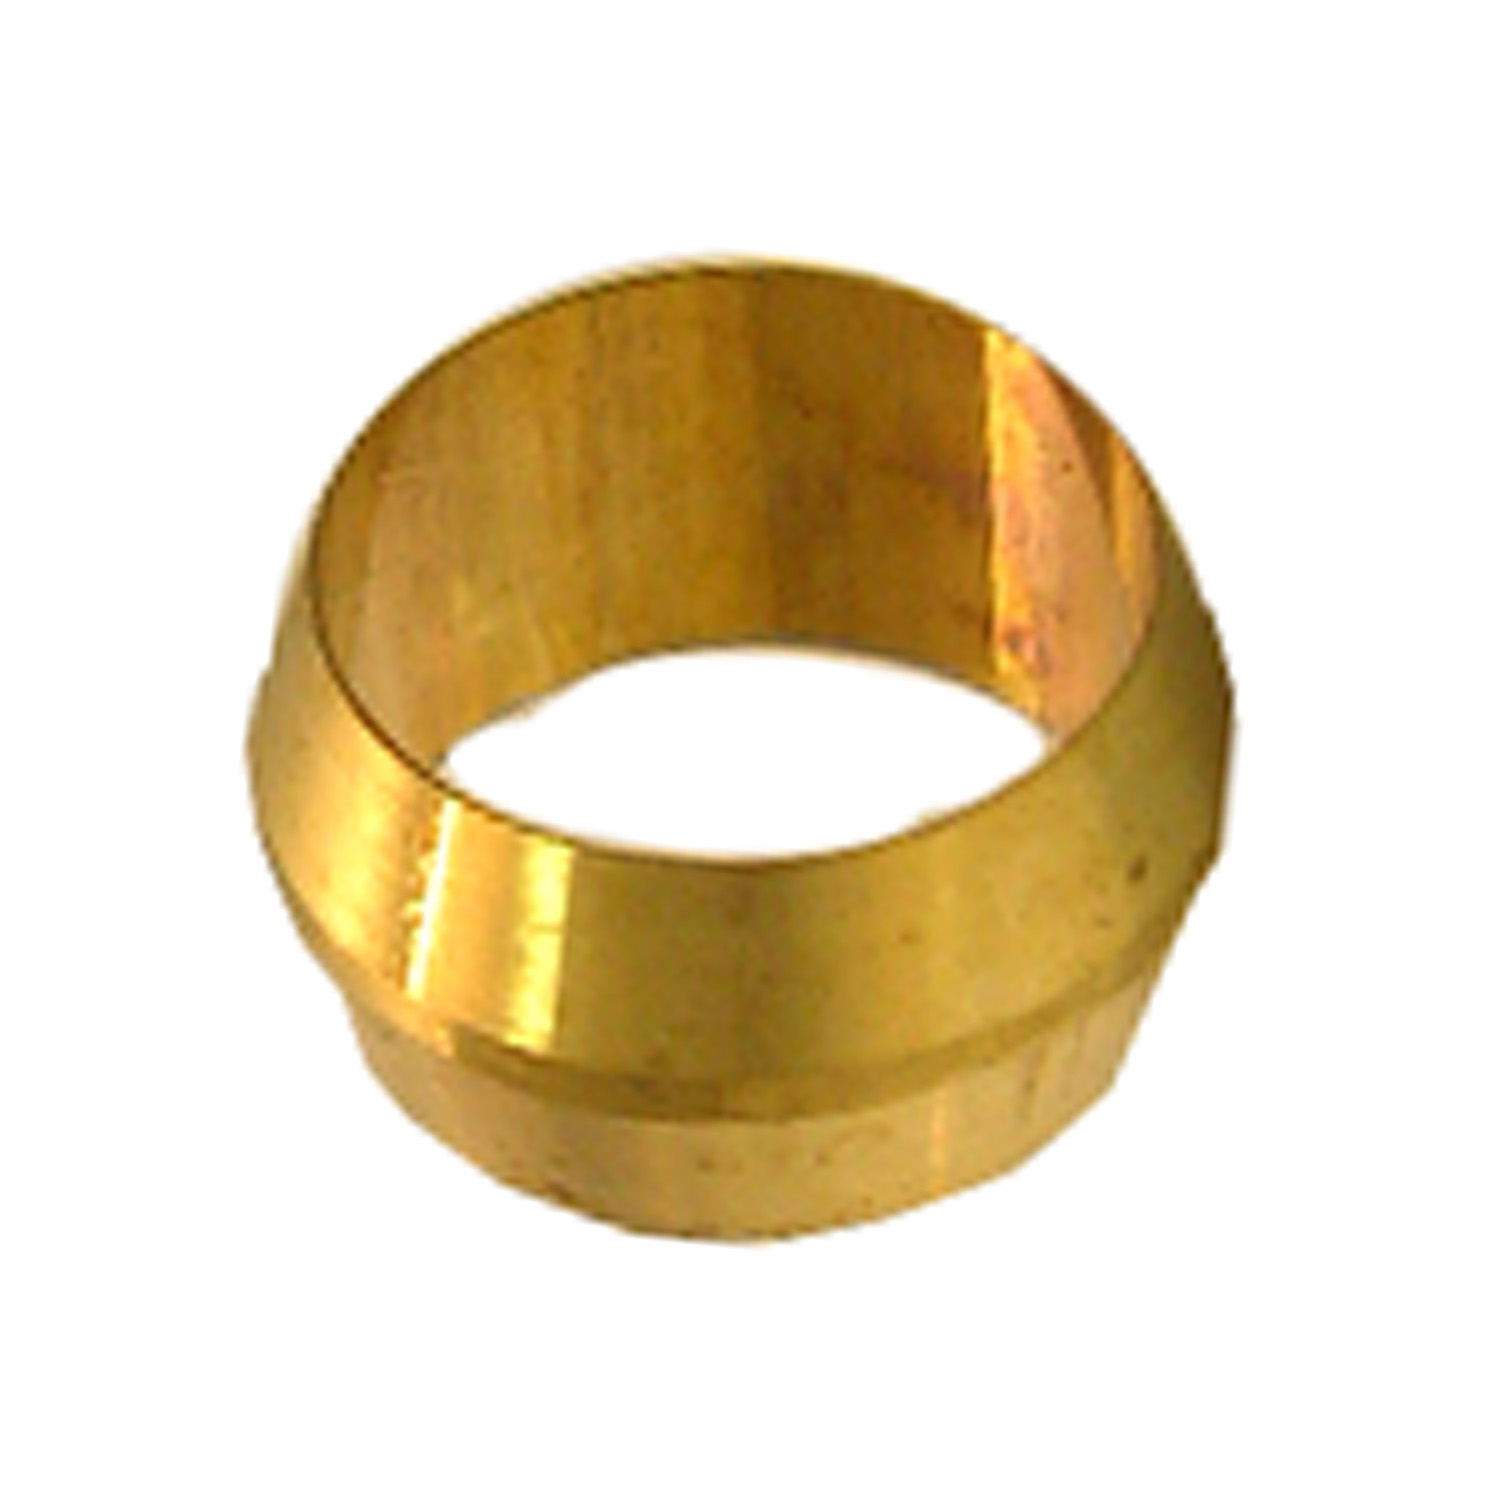 17-6011 Pipe Sleeve, 1/4 in Compression, Brass